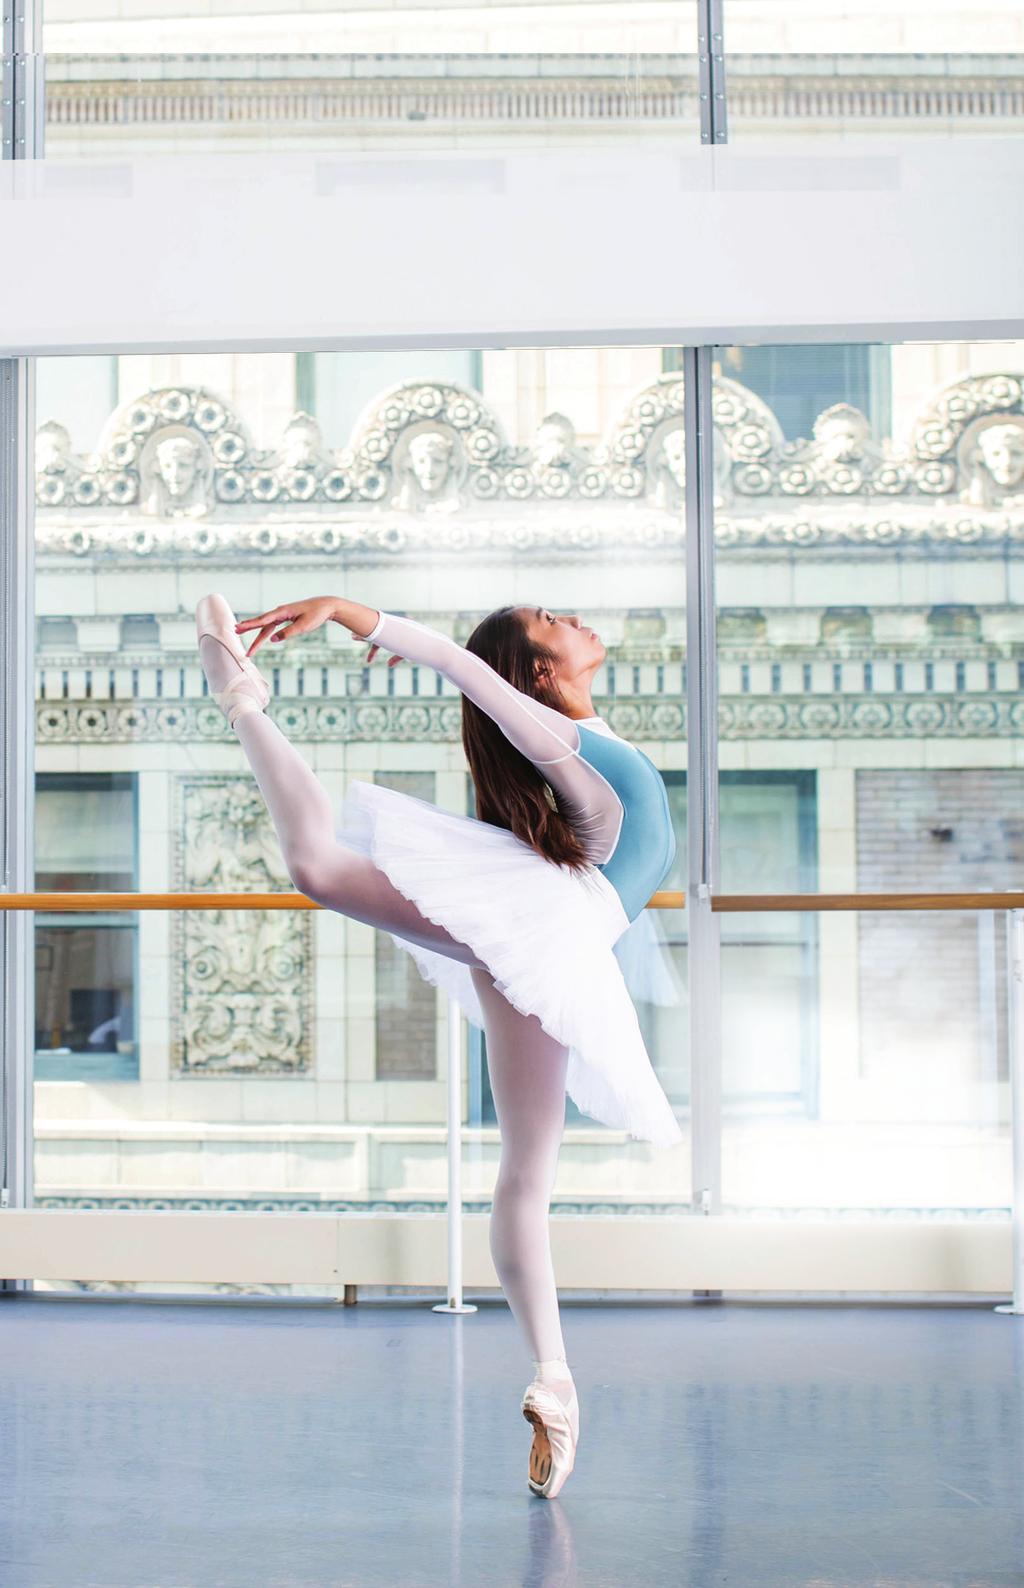 EXPERIENCE MUSIC IN COMMUNITY 2018 2019 Photo by Cheryl Mann Joffrey Academy Dancers, January 25, 2019 SUBSCRIBE TODAY: